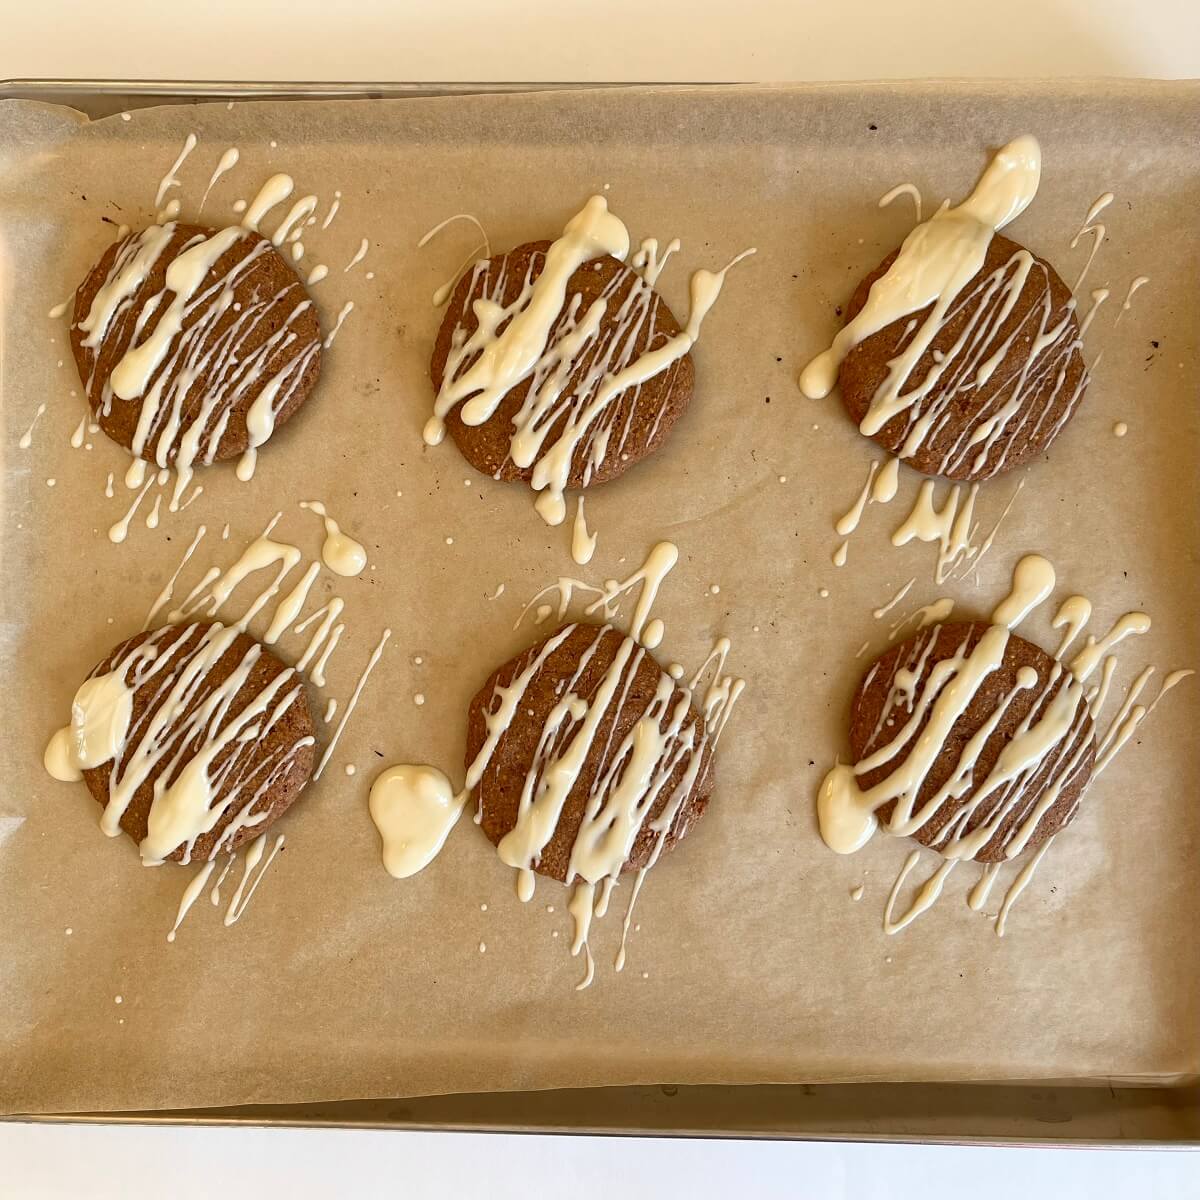 Cookies drizzled with dairy-free white chocolate on a sheet pan.